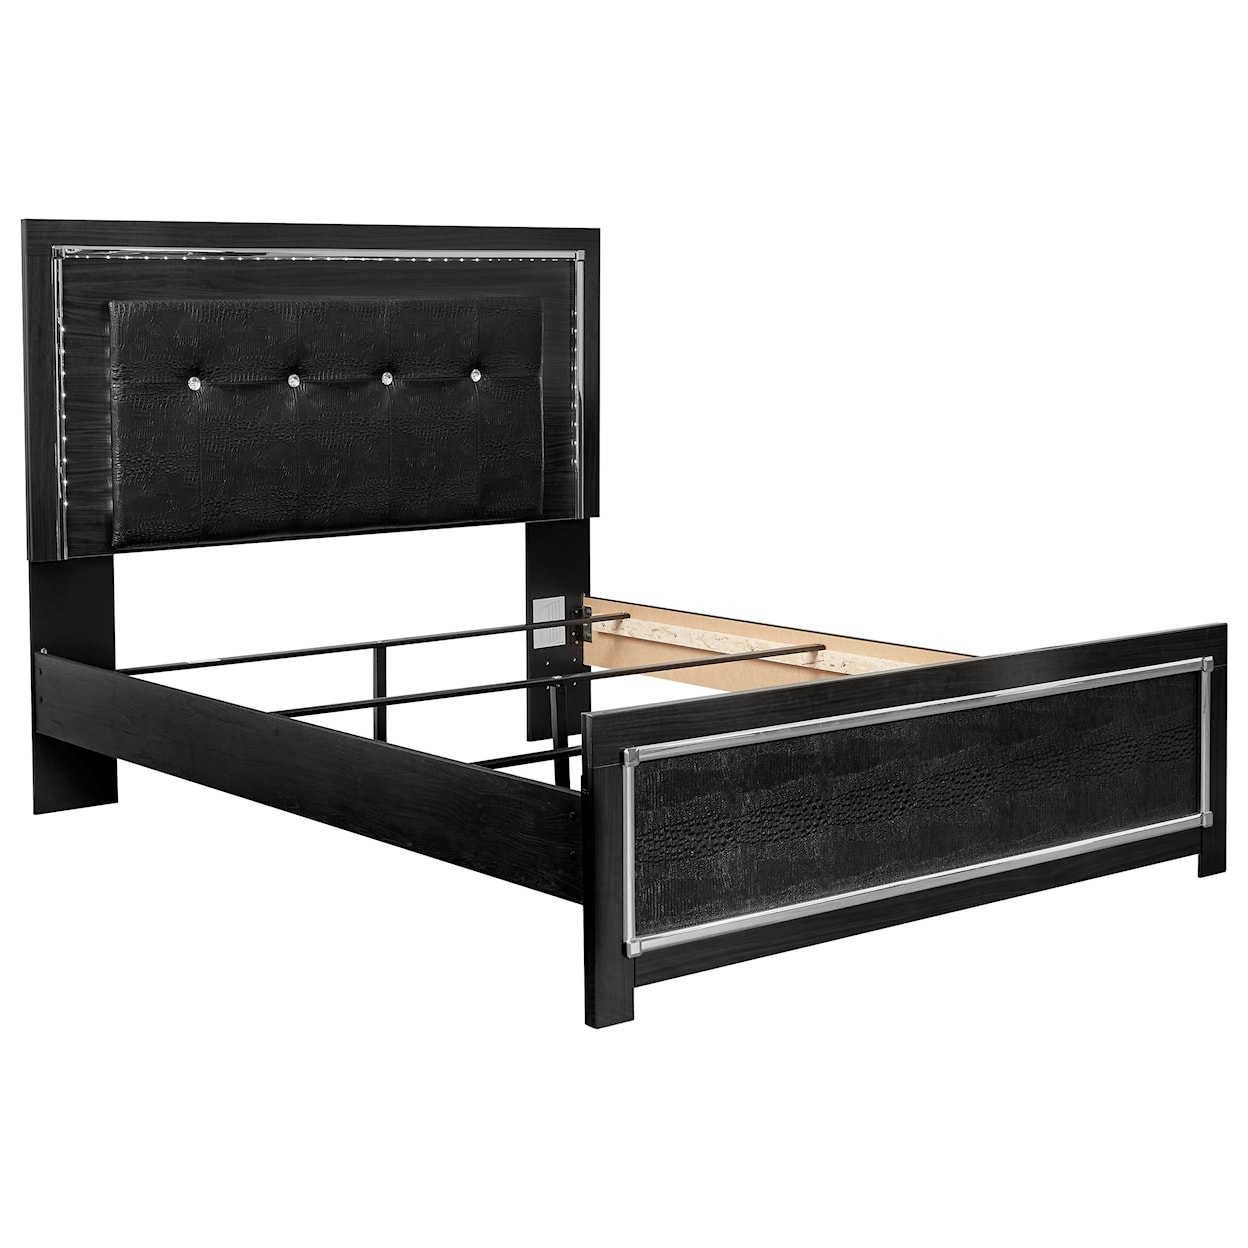 Benchcraft Kaydell Queen Upholstered Bed with LED Lighting